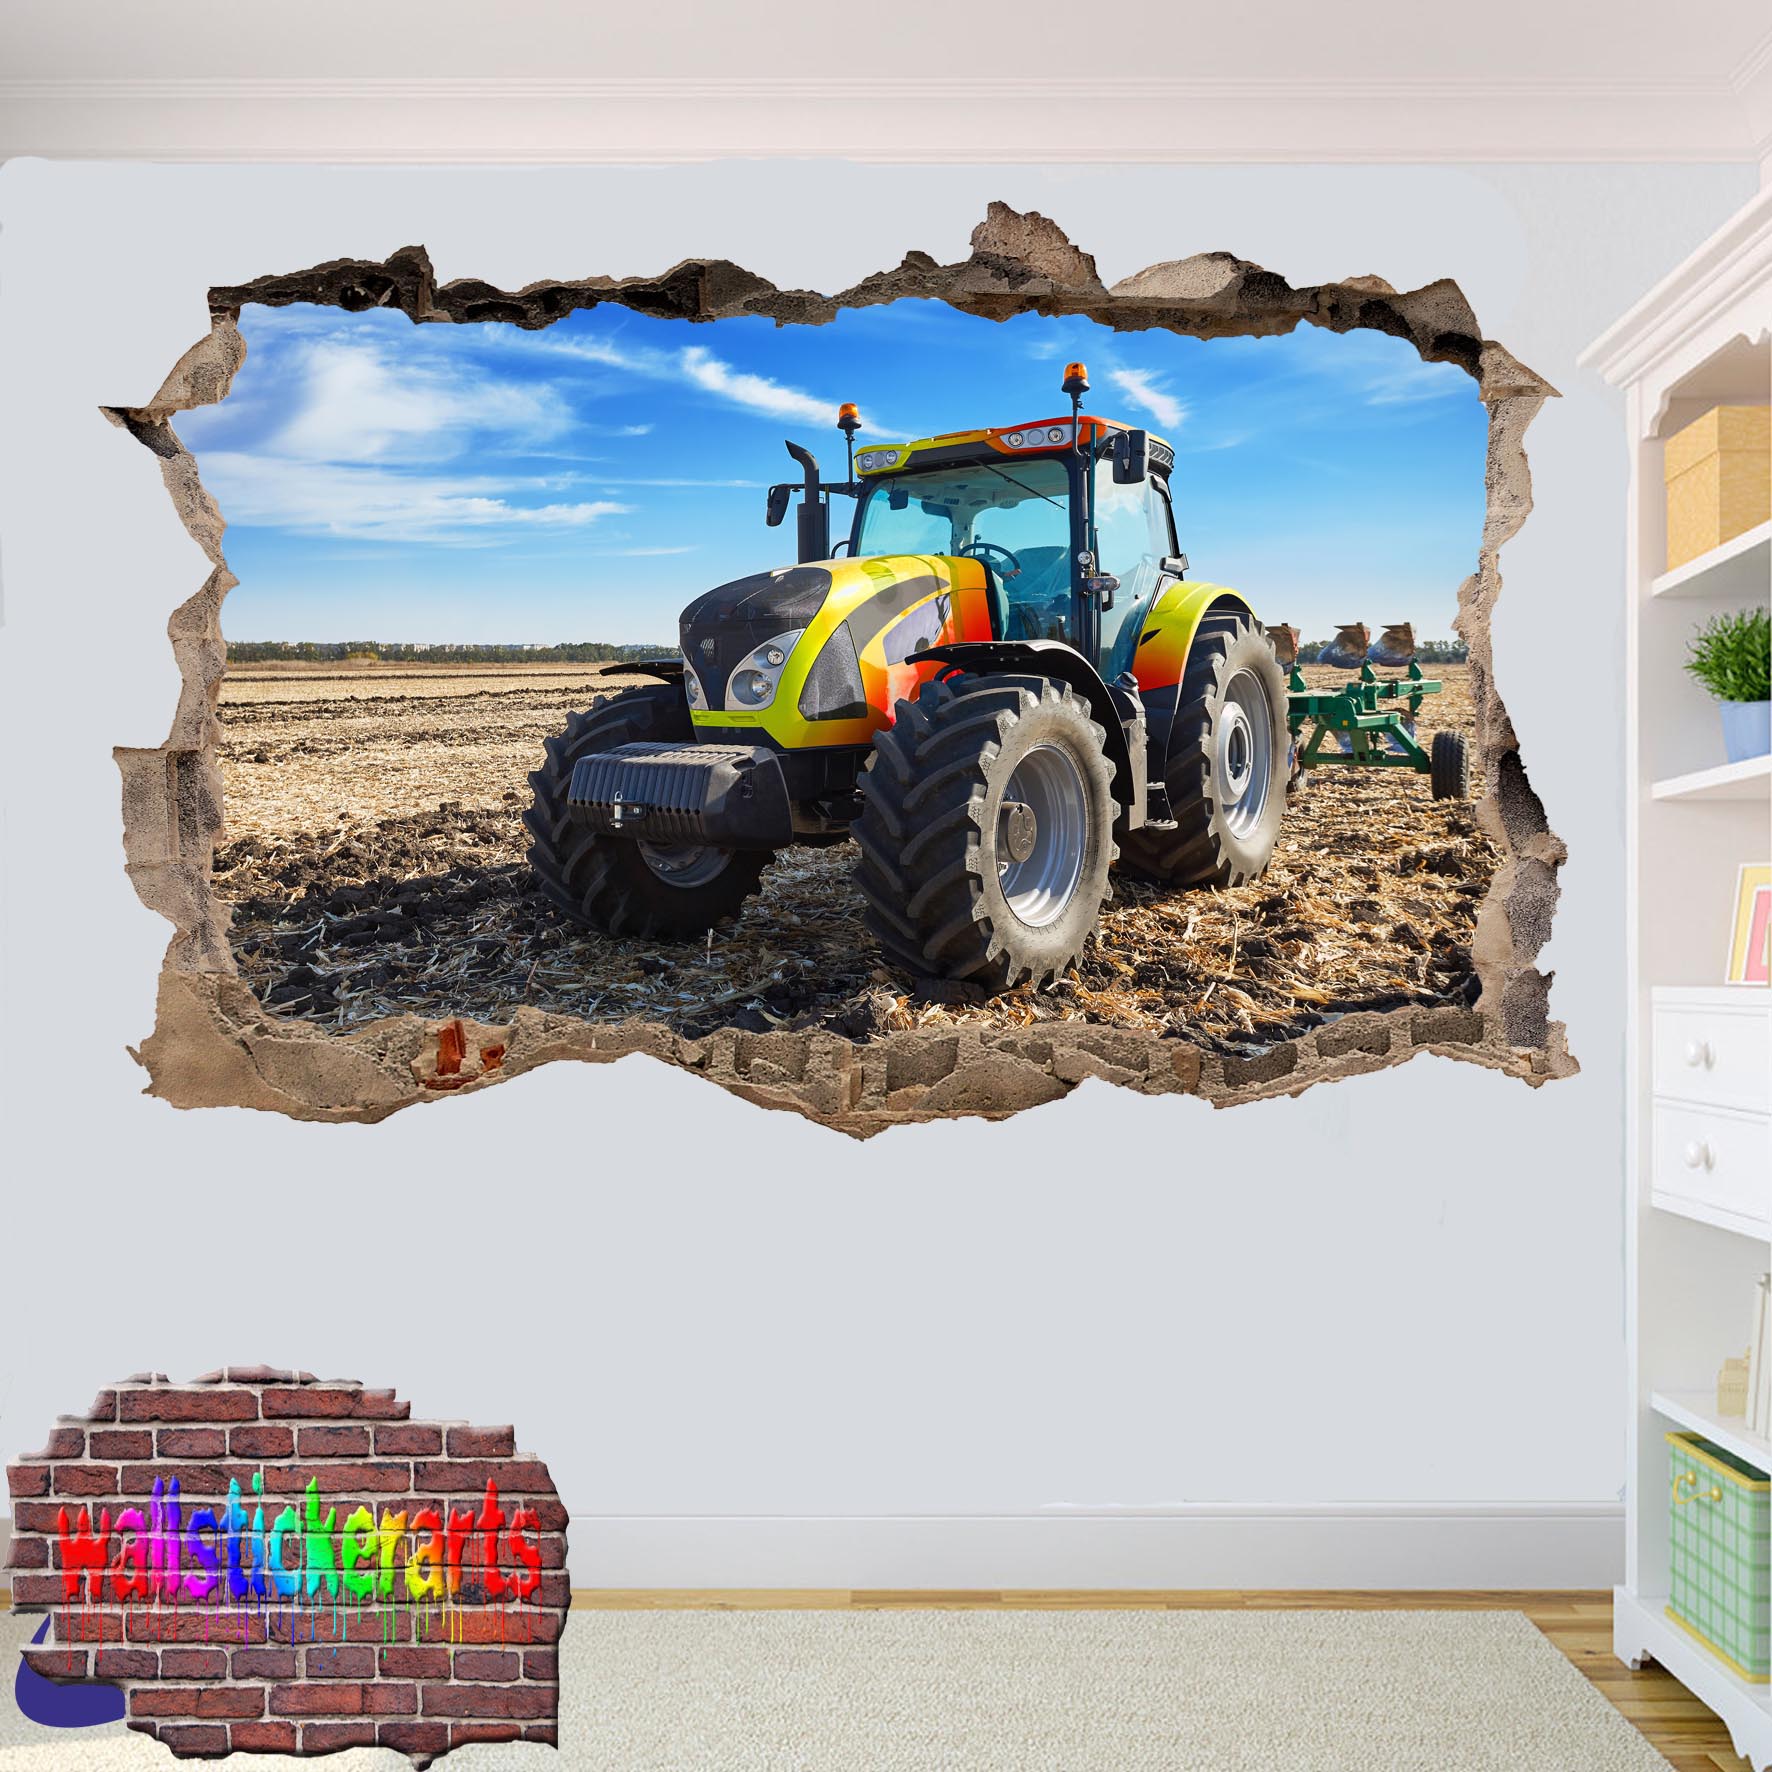 COLORFUL TRACTOR AGRICULTURAL TOOLS WALL STICKER